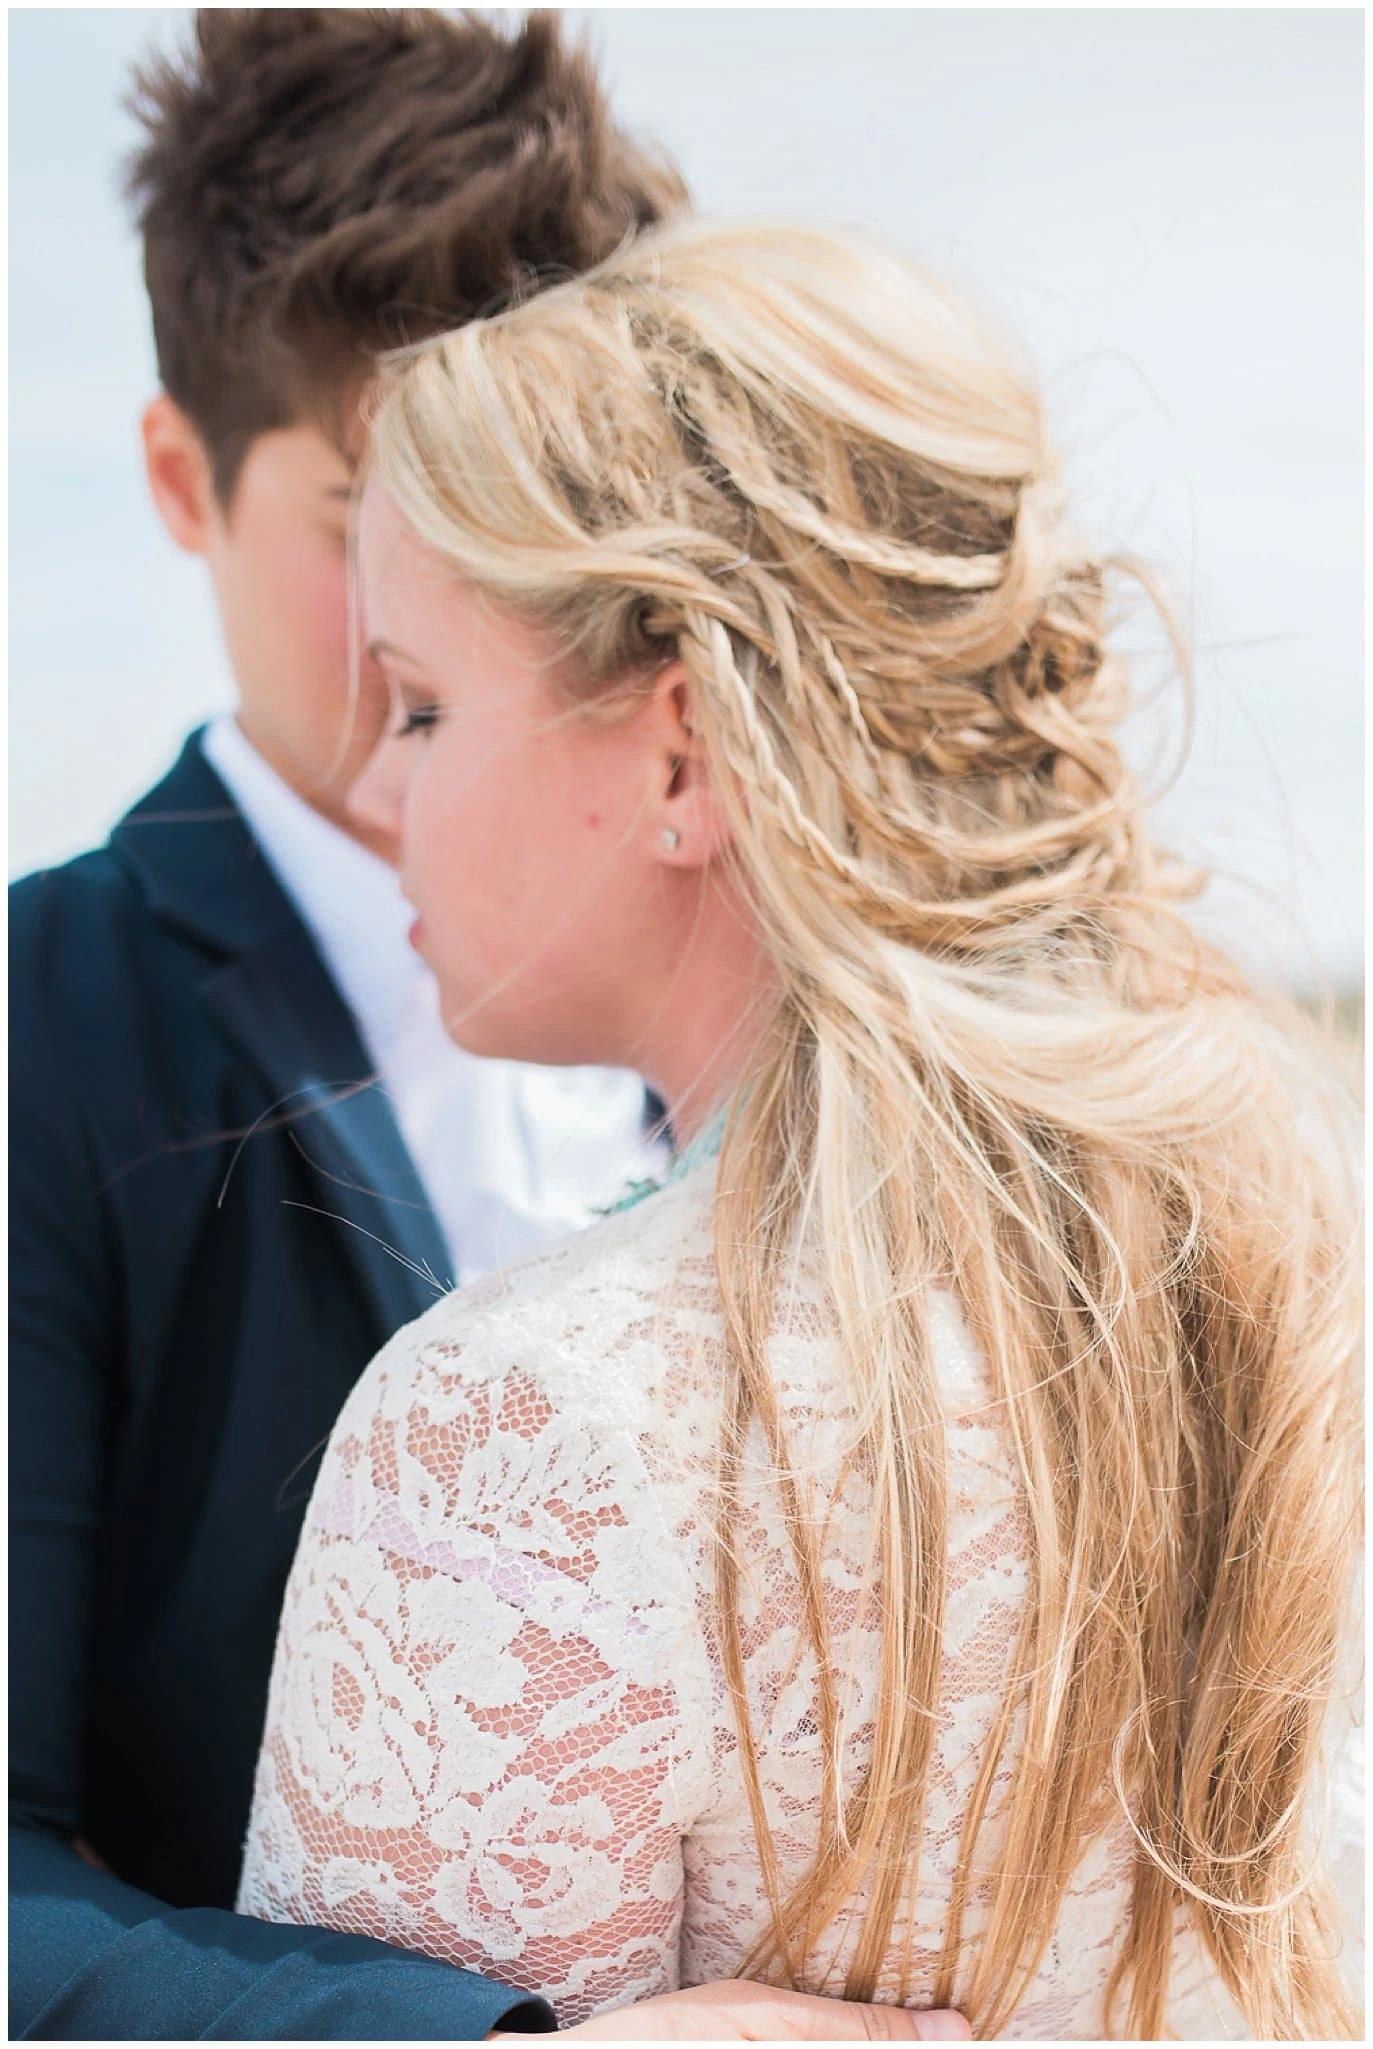 intimate photo of bride's hair with braids photo